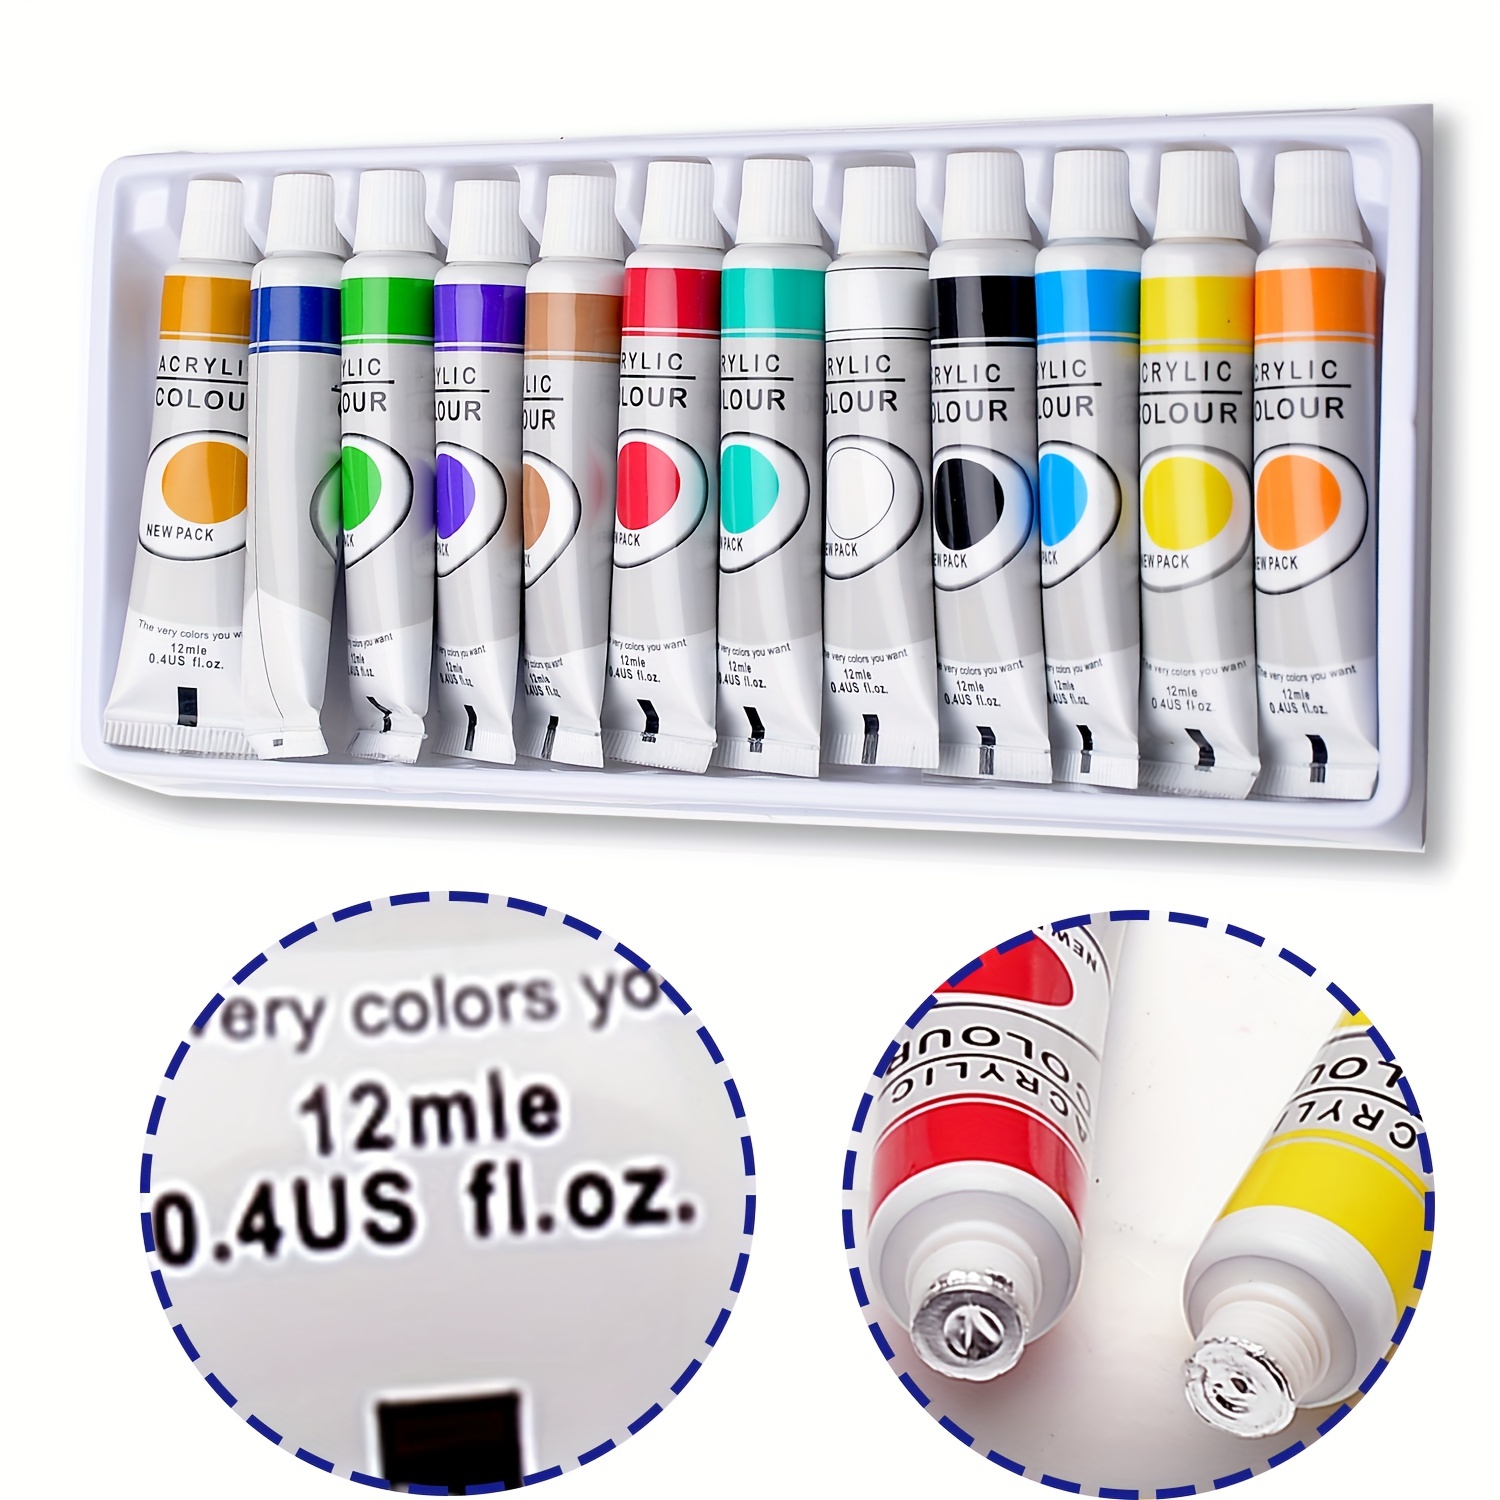 MISULOVE Watercolor Paint Set, 36 Premium Colors in Gift Box with Bonus  Watercolor Paper and Brush, Perfect for Artists, Kids, Beginners, Adult